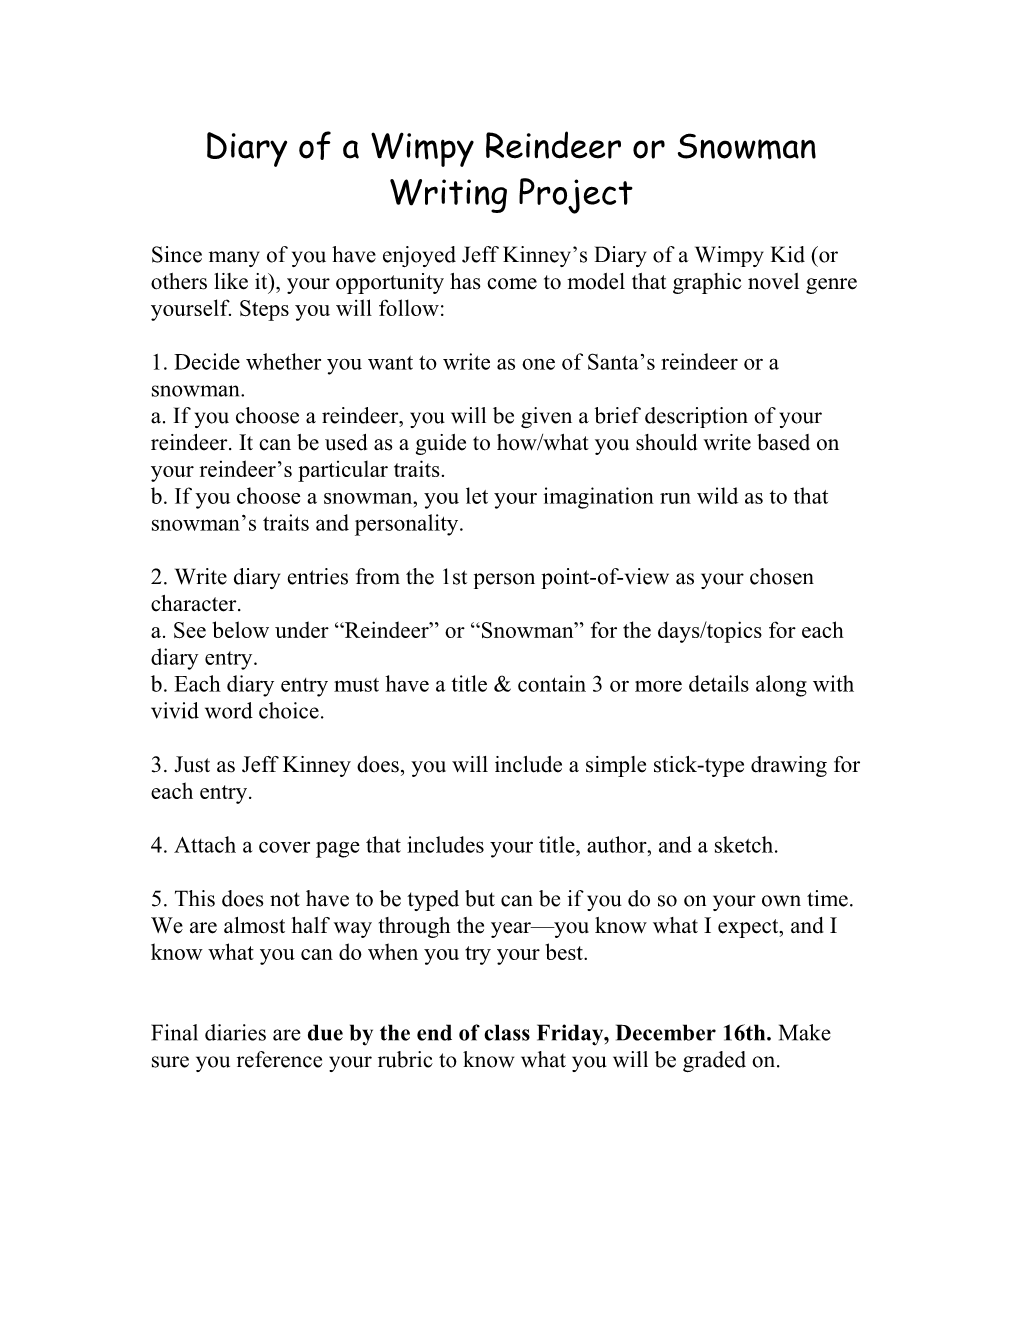 Diary of a Wimpy Reindeer Or Snowman Writing Project